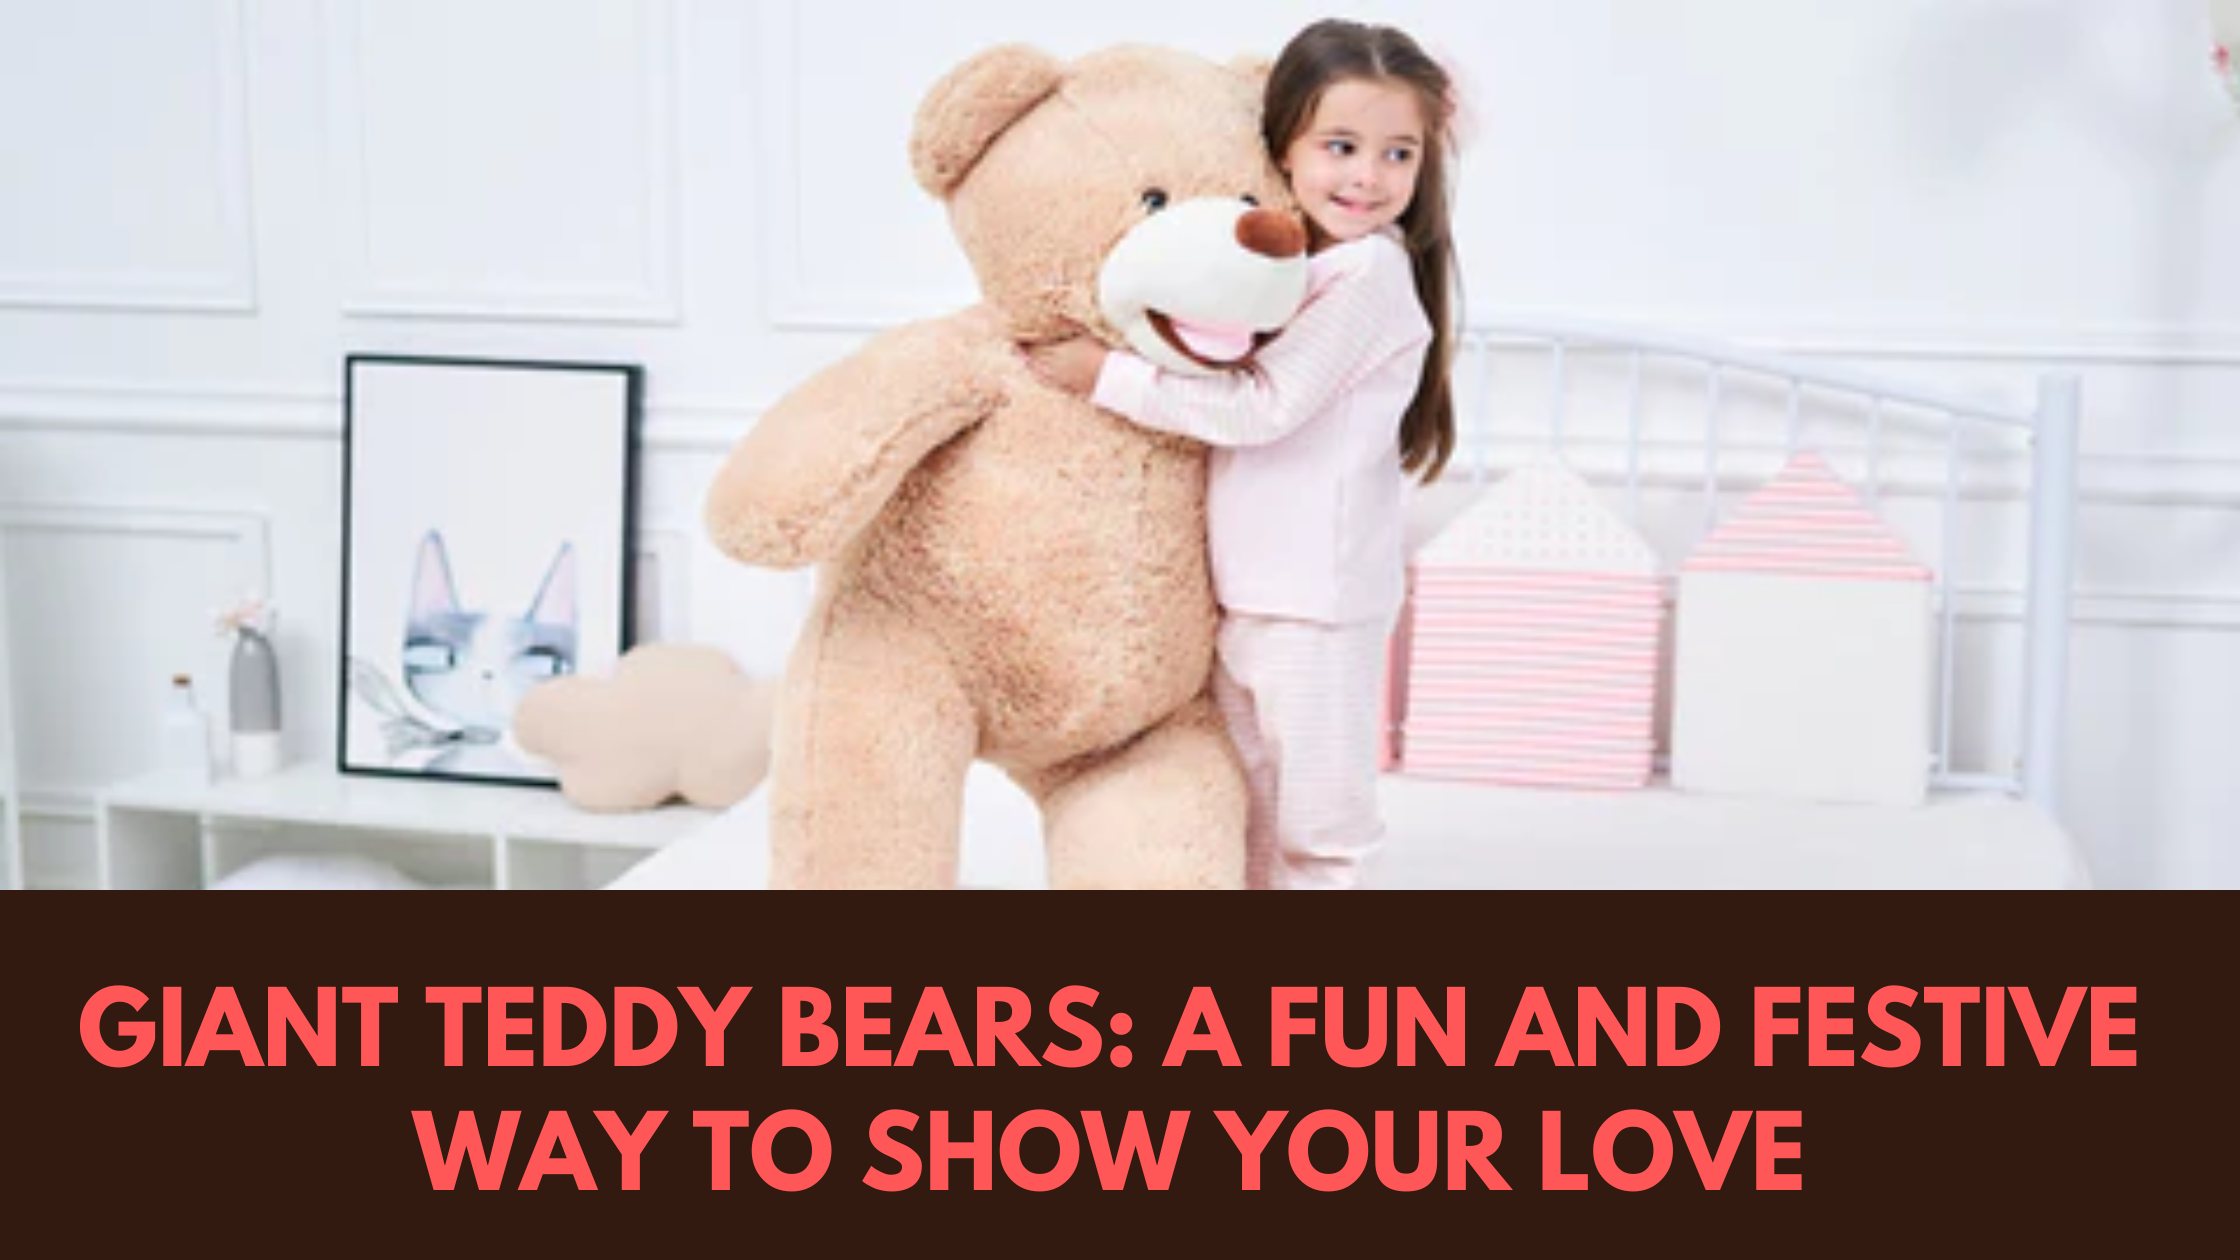 Giant Teddy Bears: A Fun and Festive Way to Show Your Love